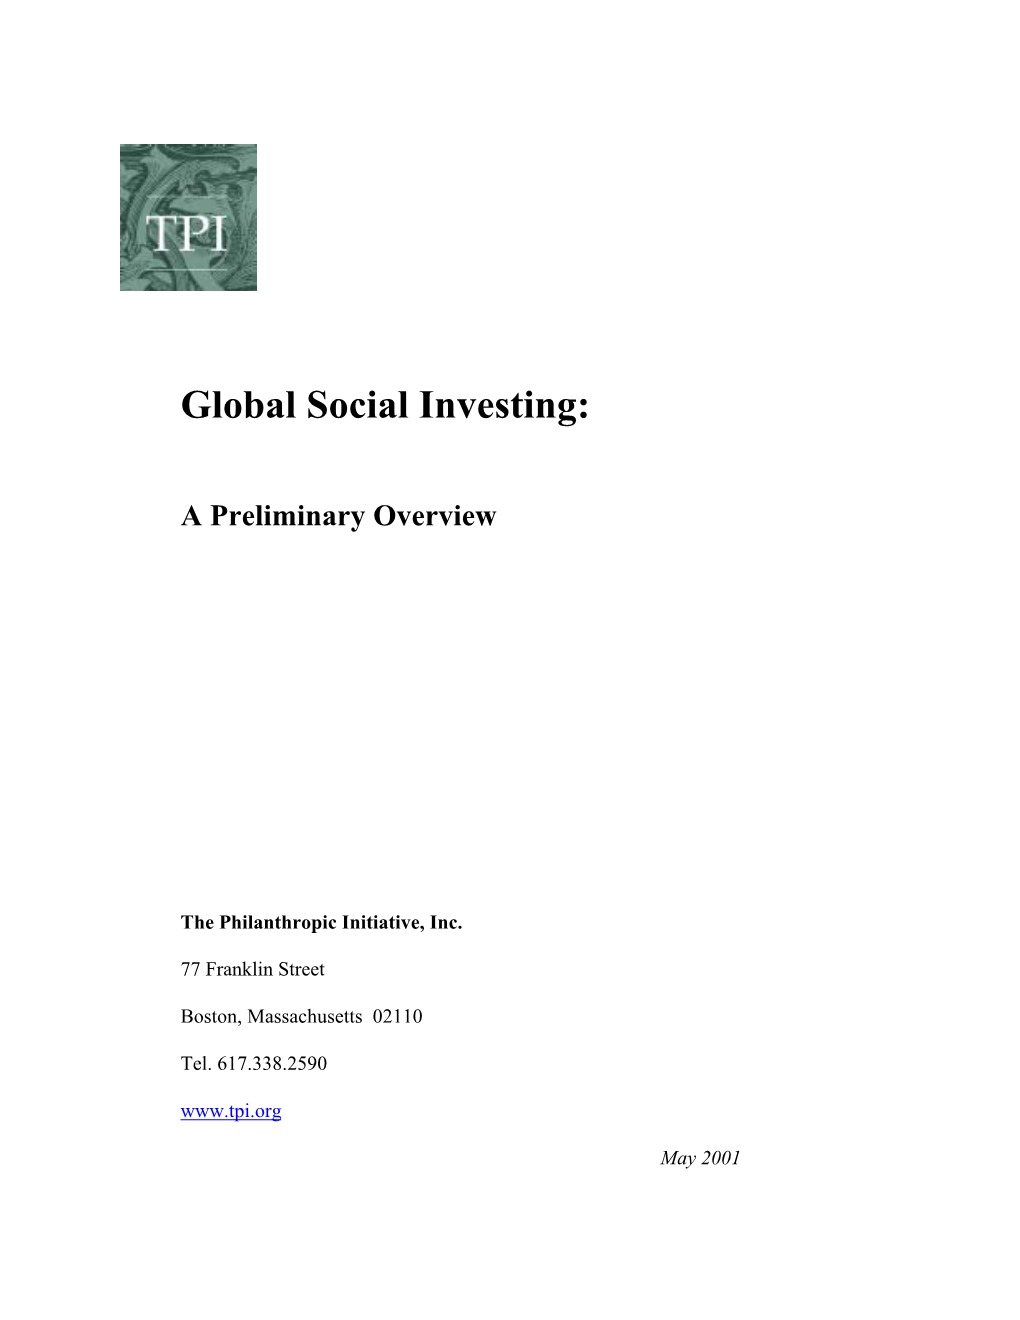 Global Social Investing: a Preliminary Overview